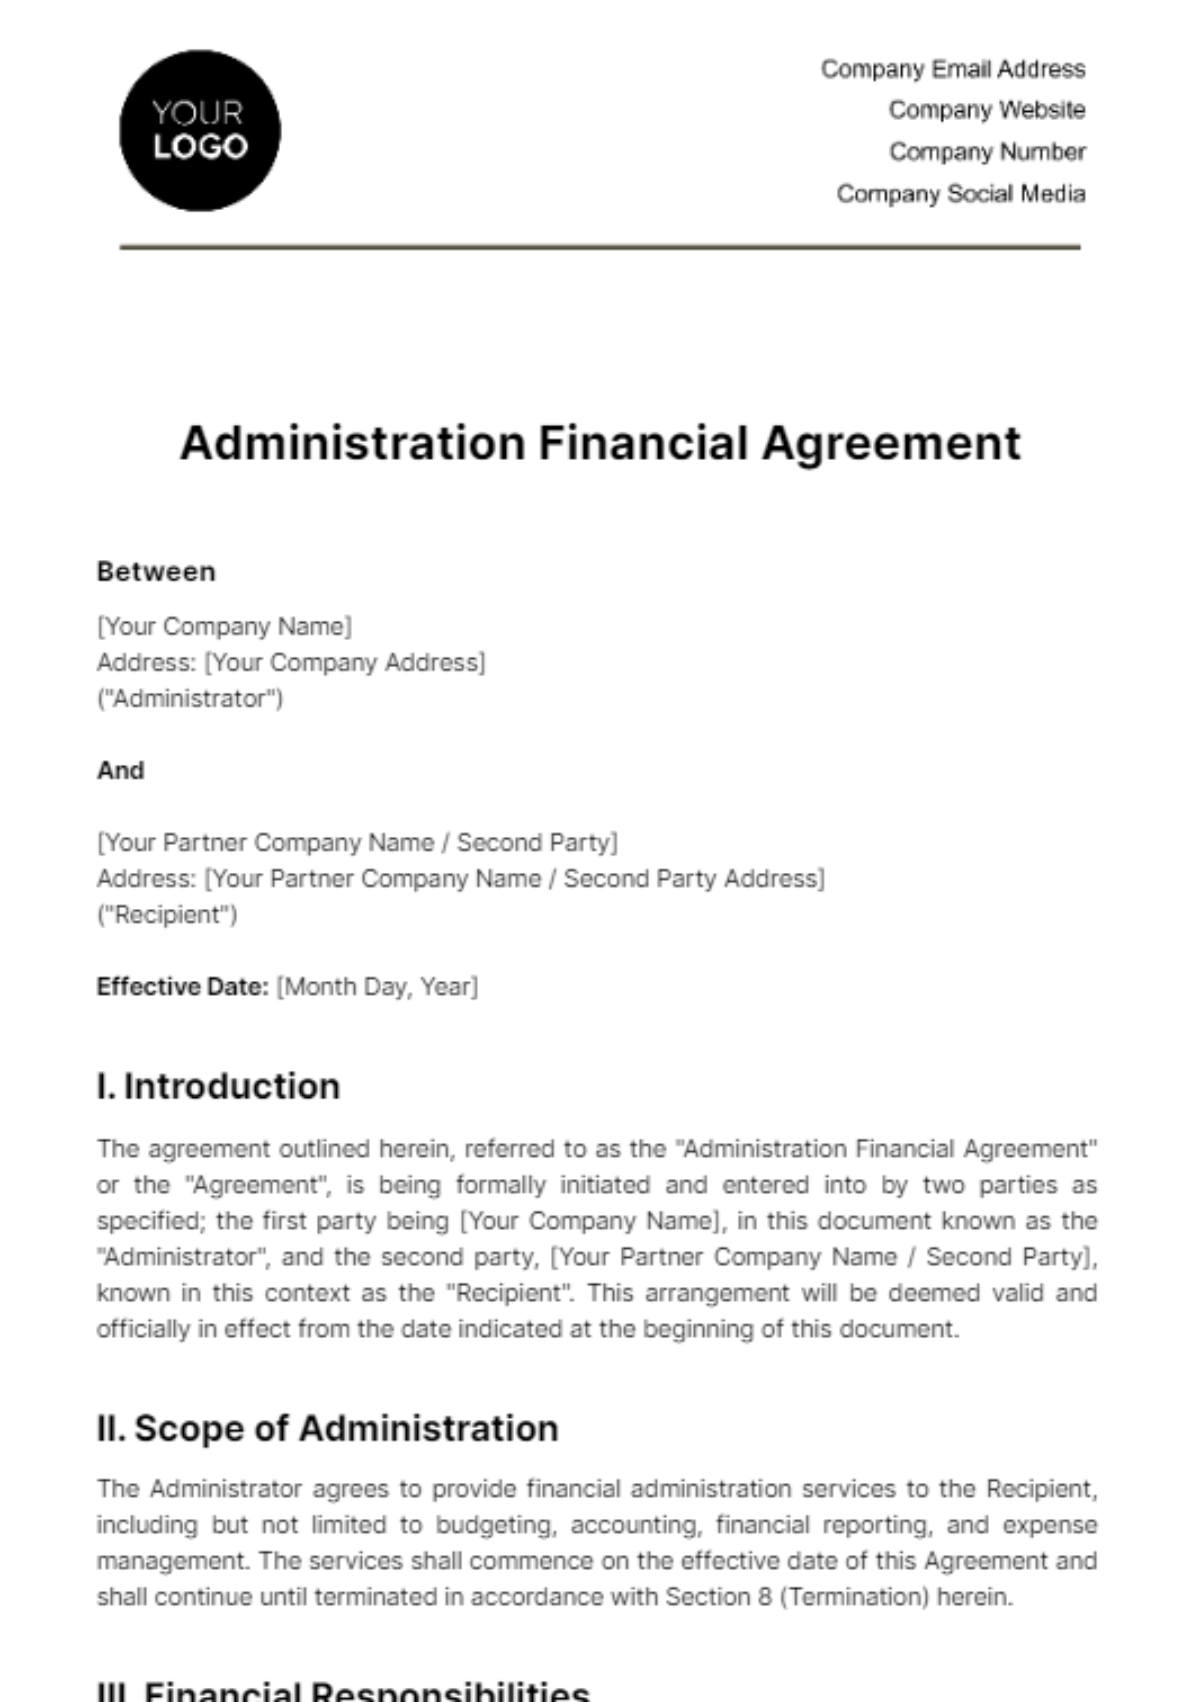 Free Administration Financial Agreement Template